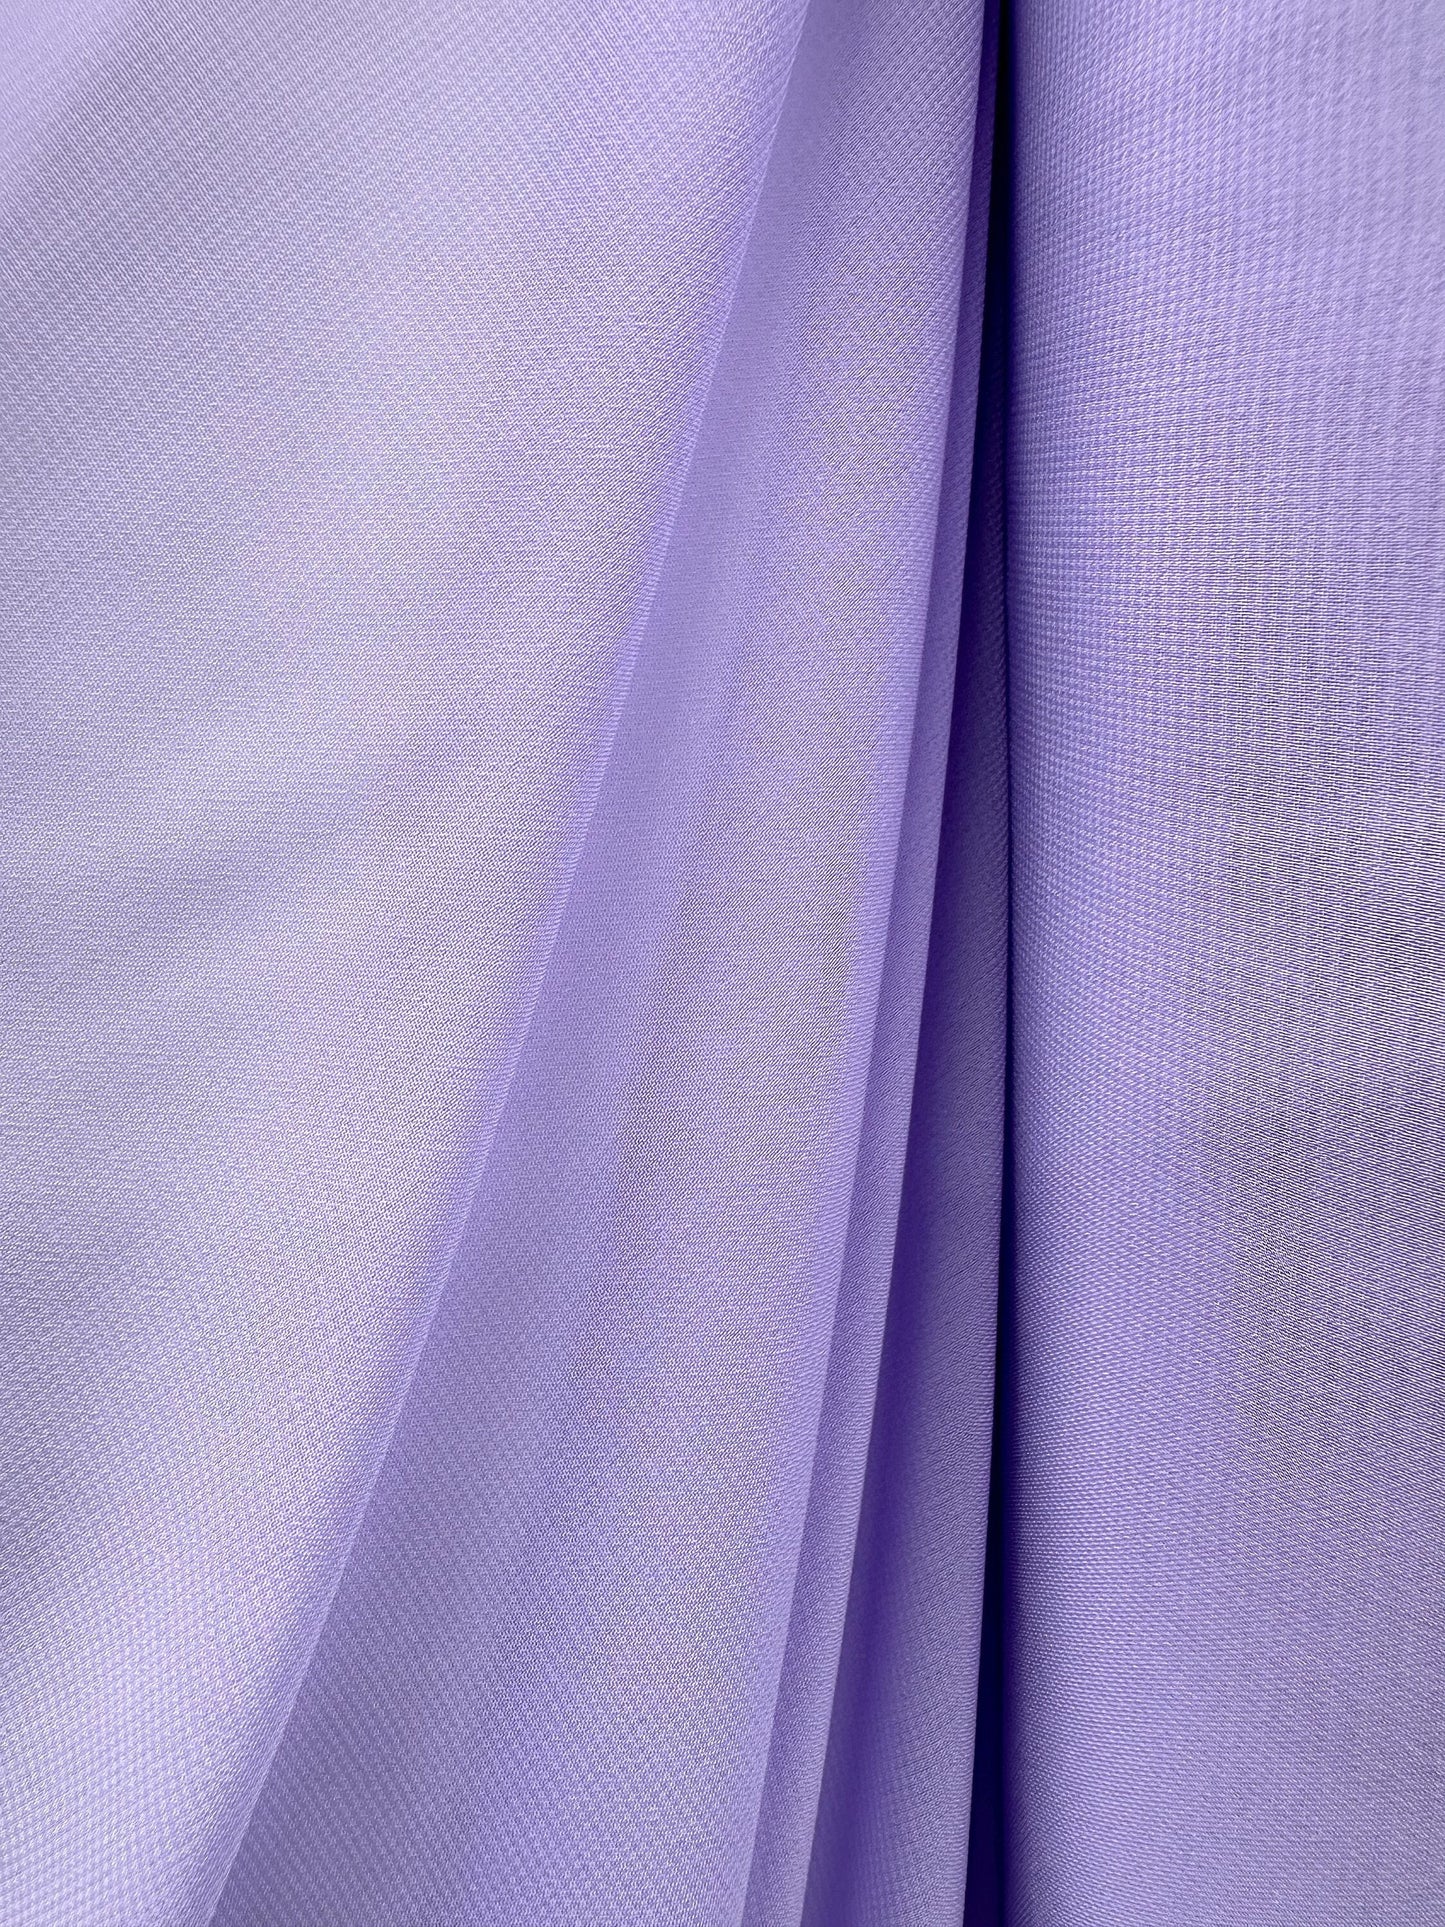 LAVENDER Sheer Solid Polyester Chiffon Fabric (60 in.) Sold By The Yard